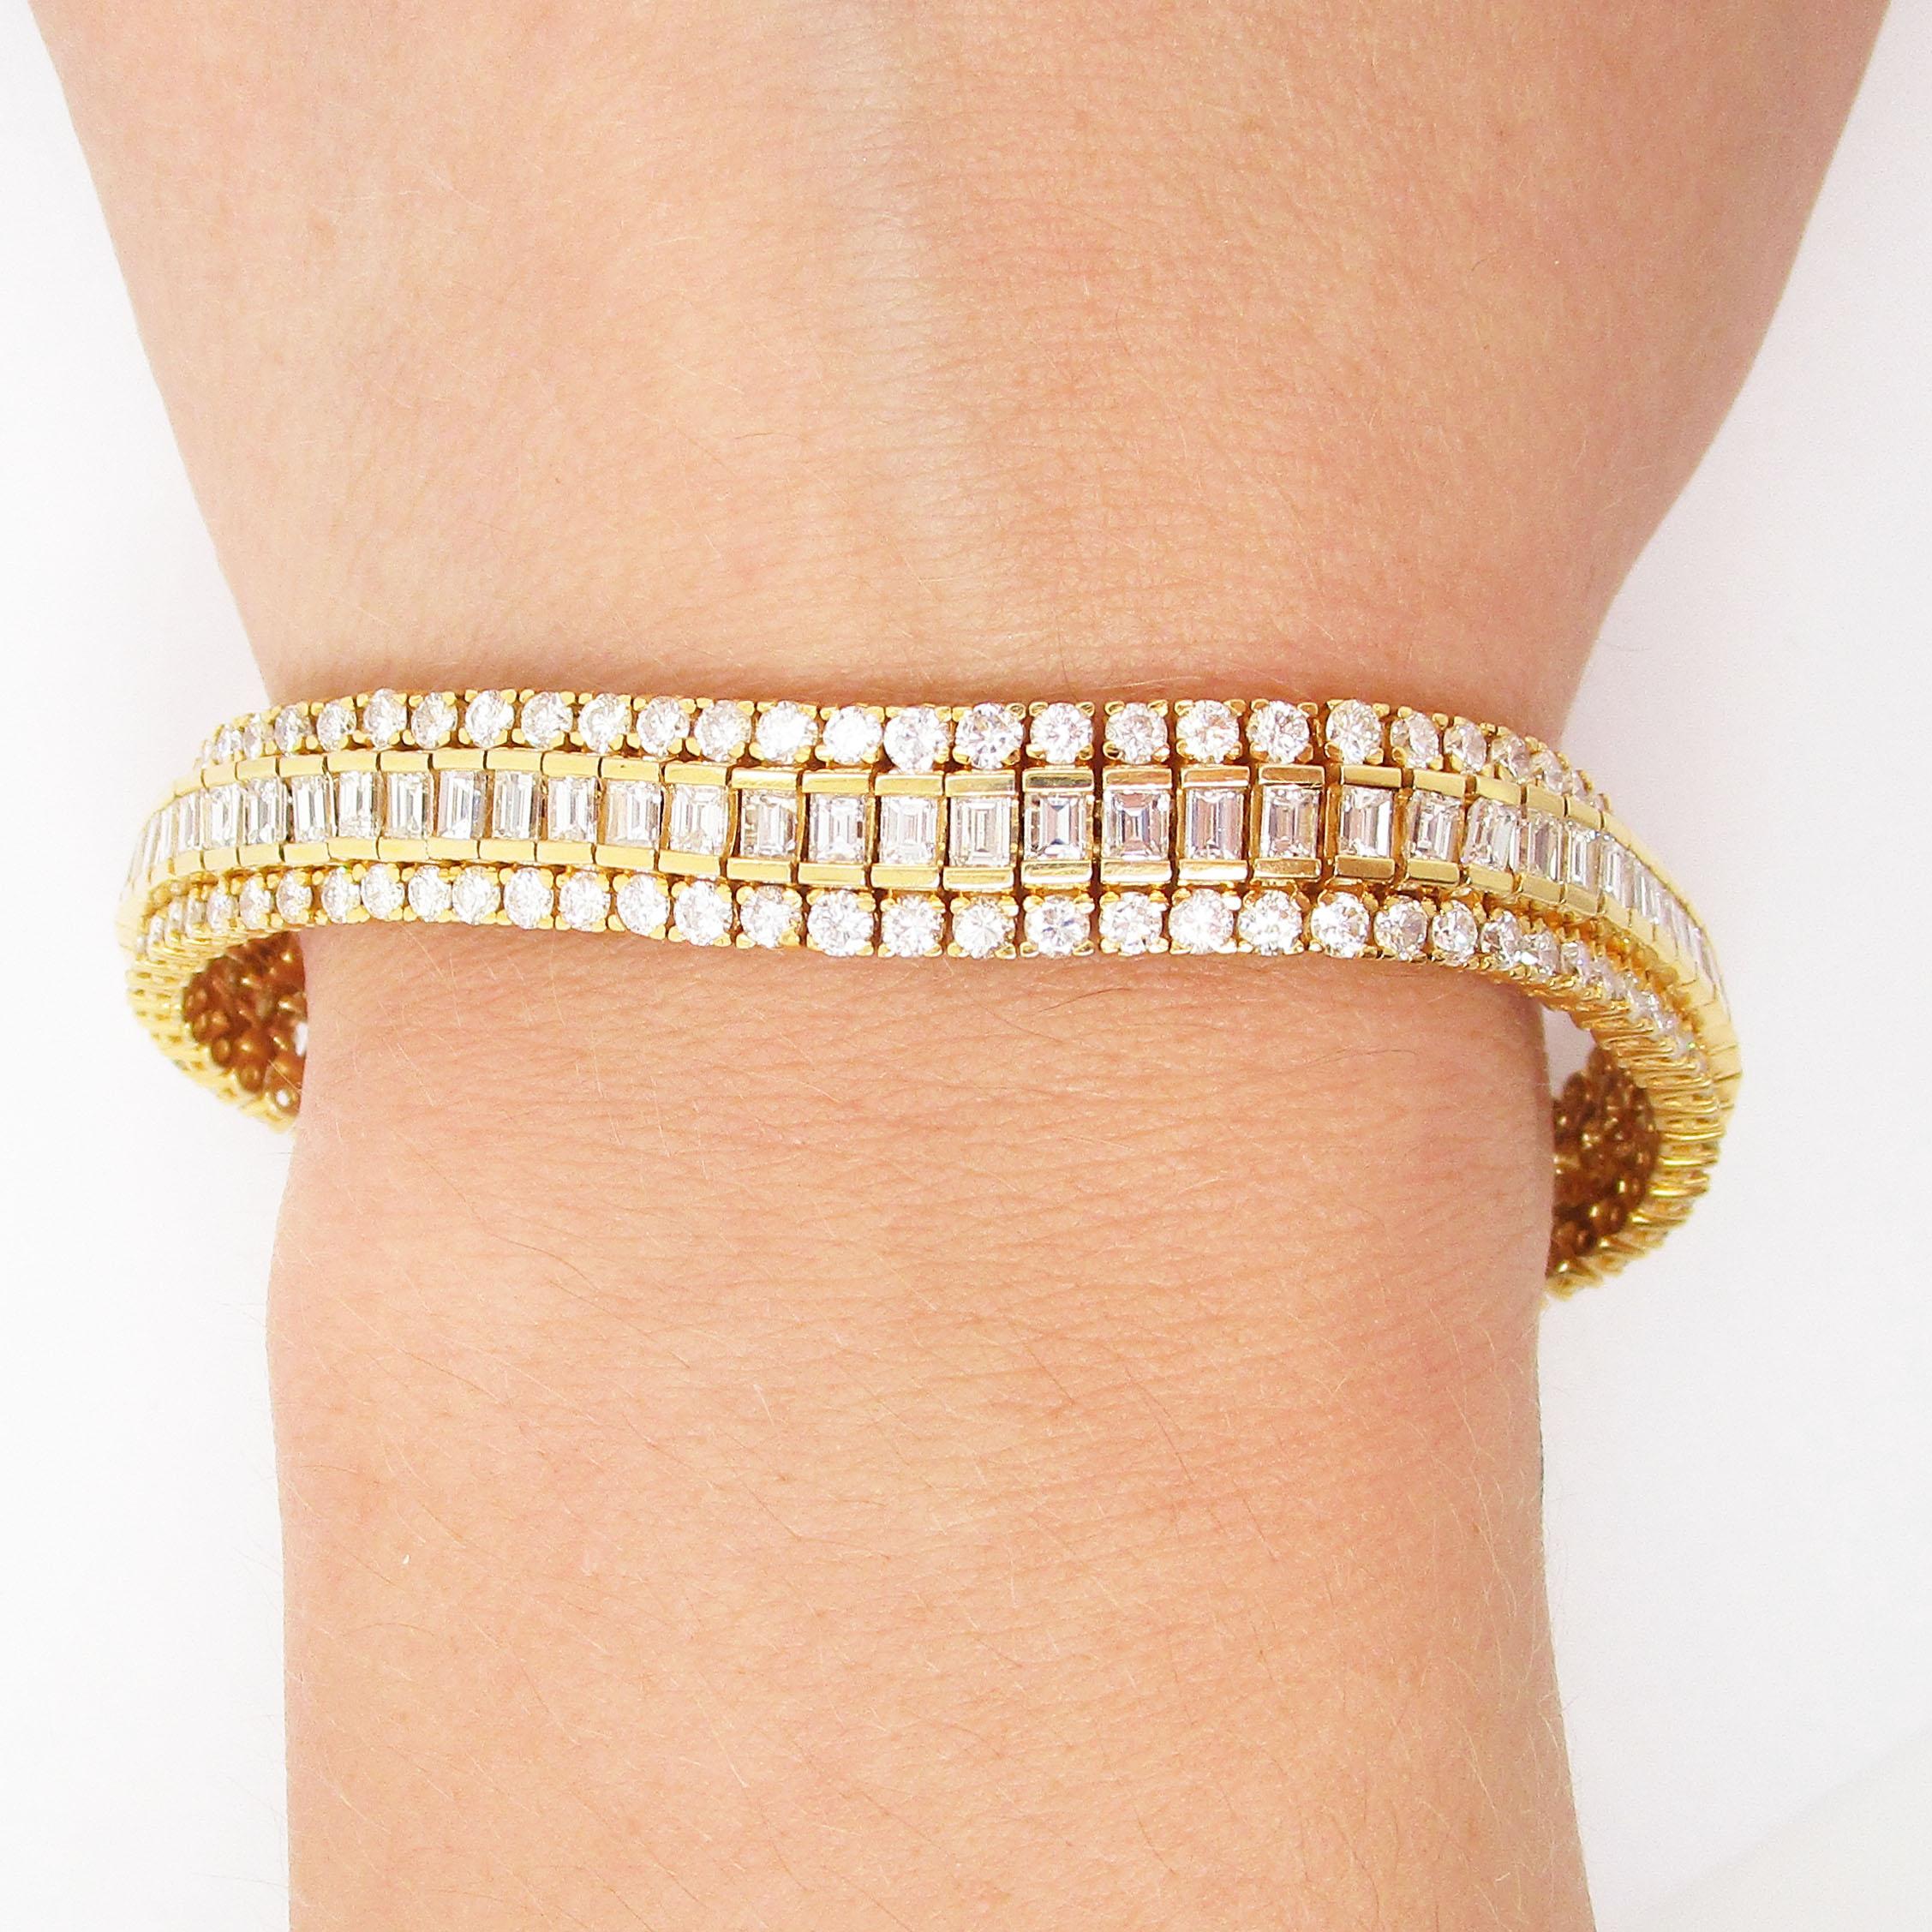 This is an absolutely stunning bracelet in 14k yellow gold with a brilliant array of bright white diamonds. This bracelet is not for the faint of heart! The gorgeous combination of rich yellow gold and scintillating diamonds makes this bracelet